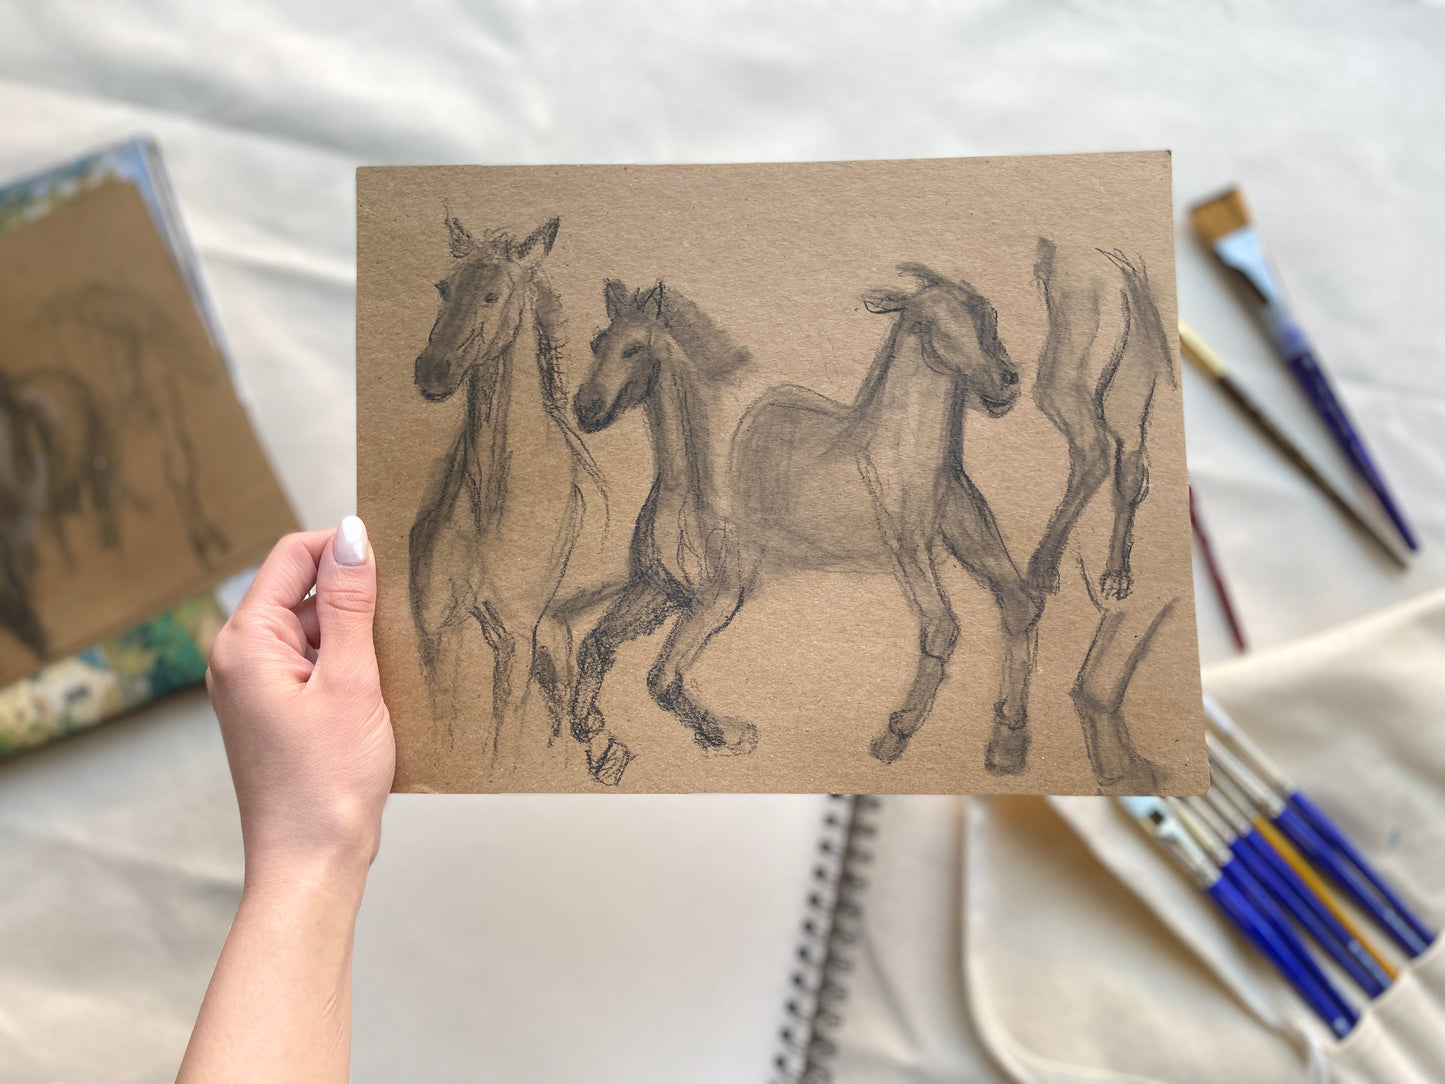 Galloping horses drawing in charcoal and graphite on craft paper